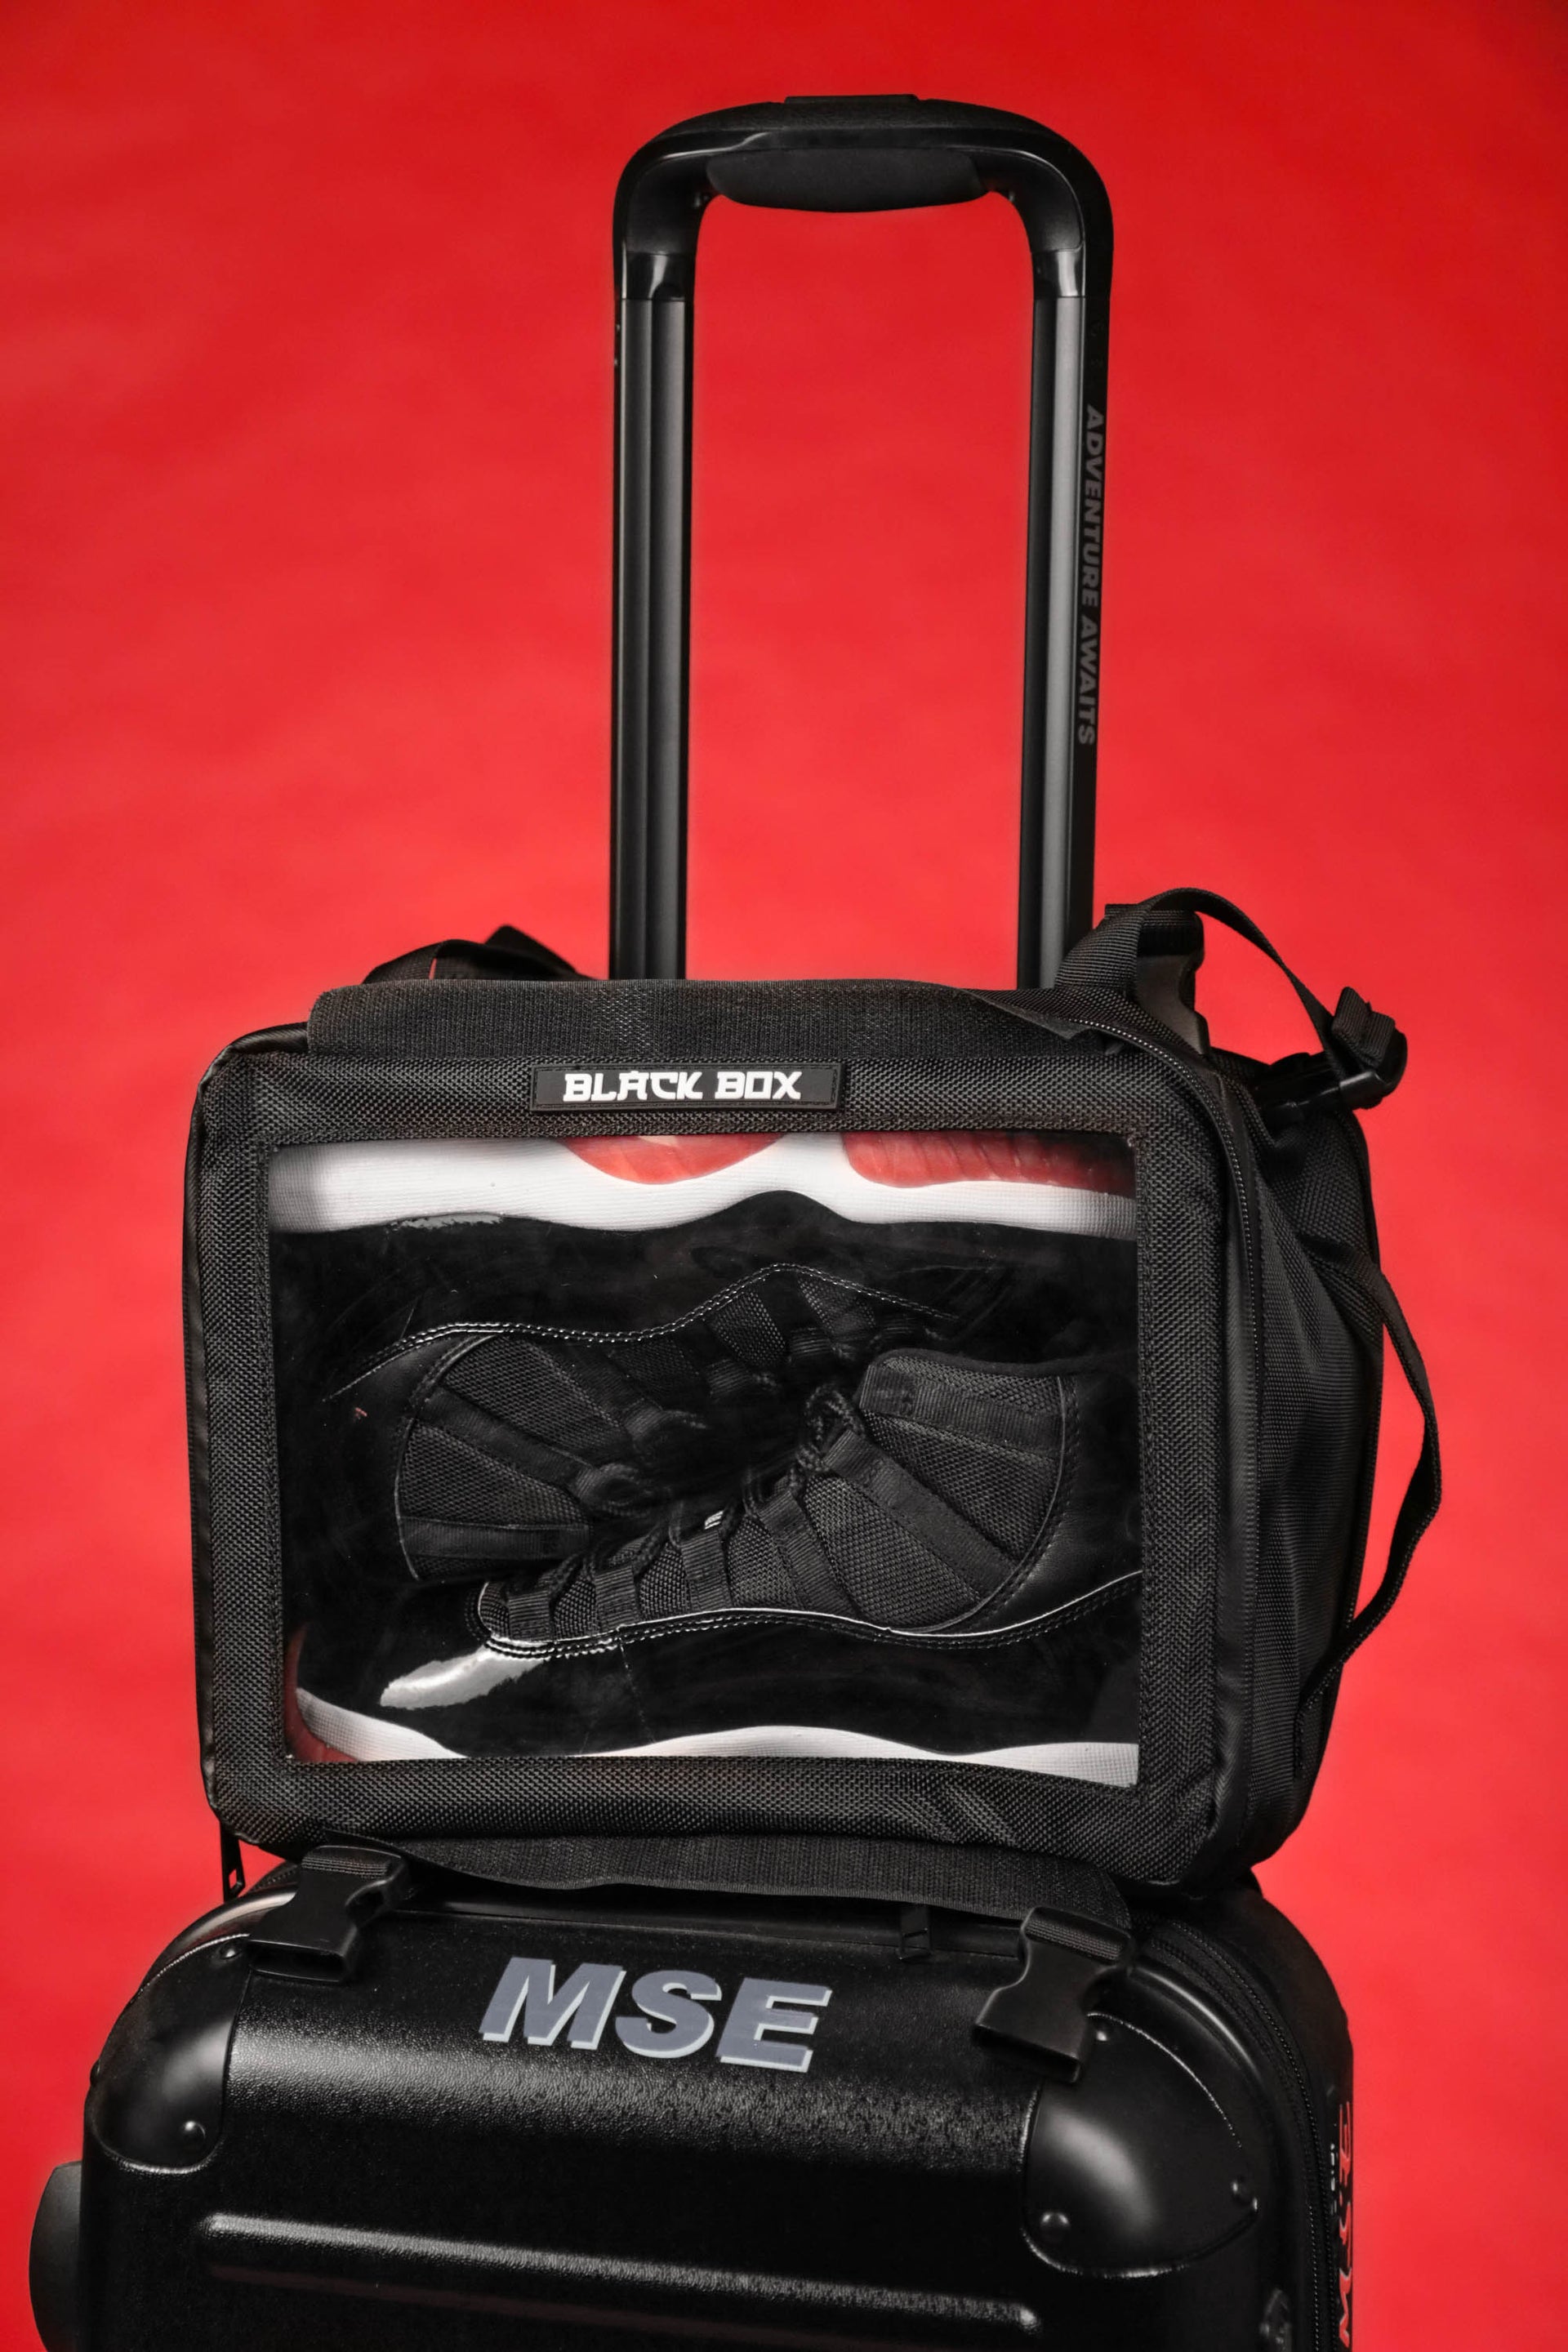 The Black Box Portable Hanging Sneaker Bag For Travel and Storage With Clear Window on a suitcase